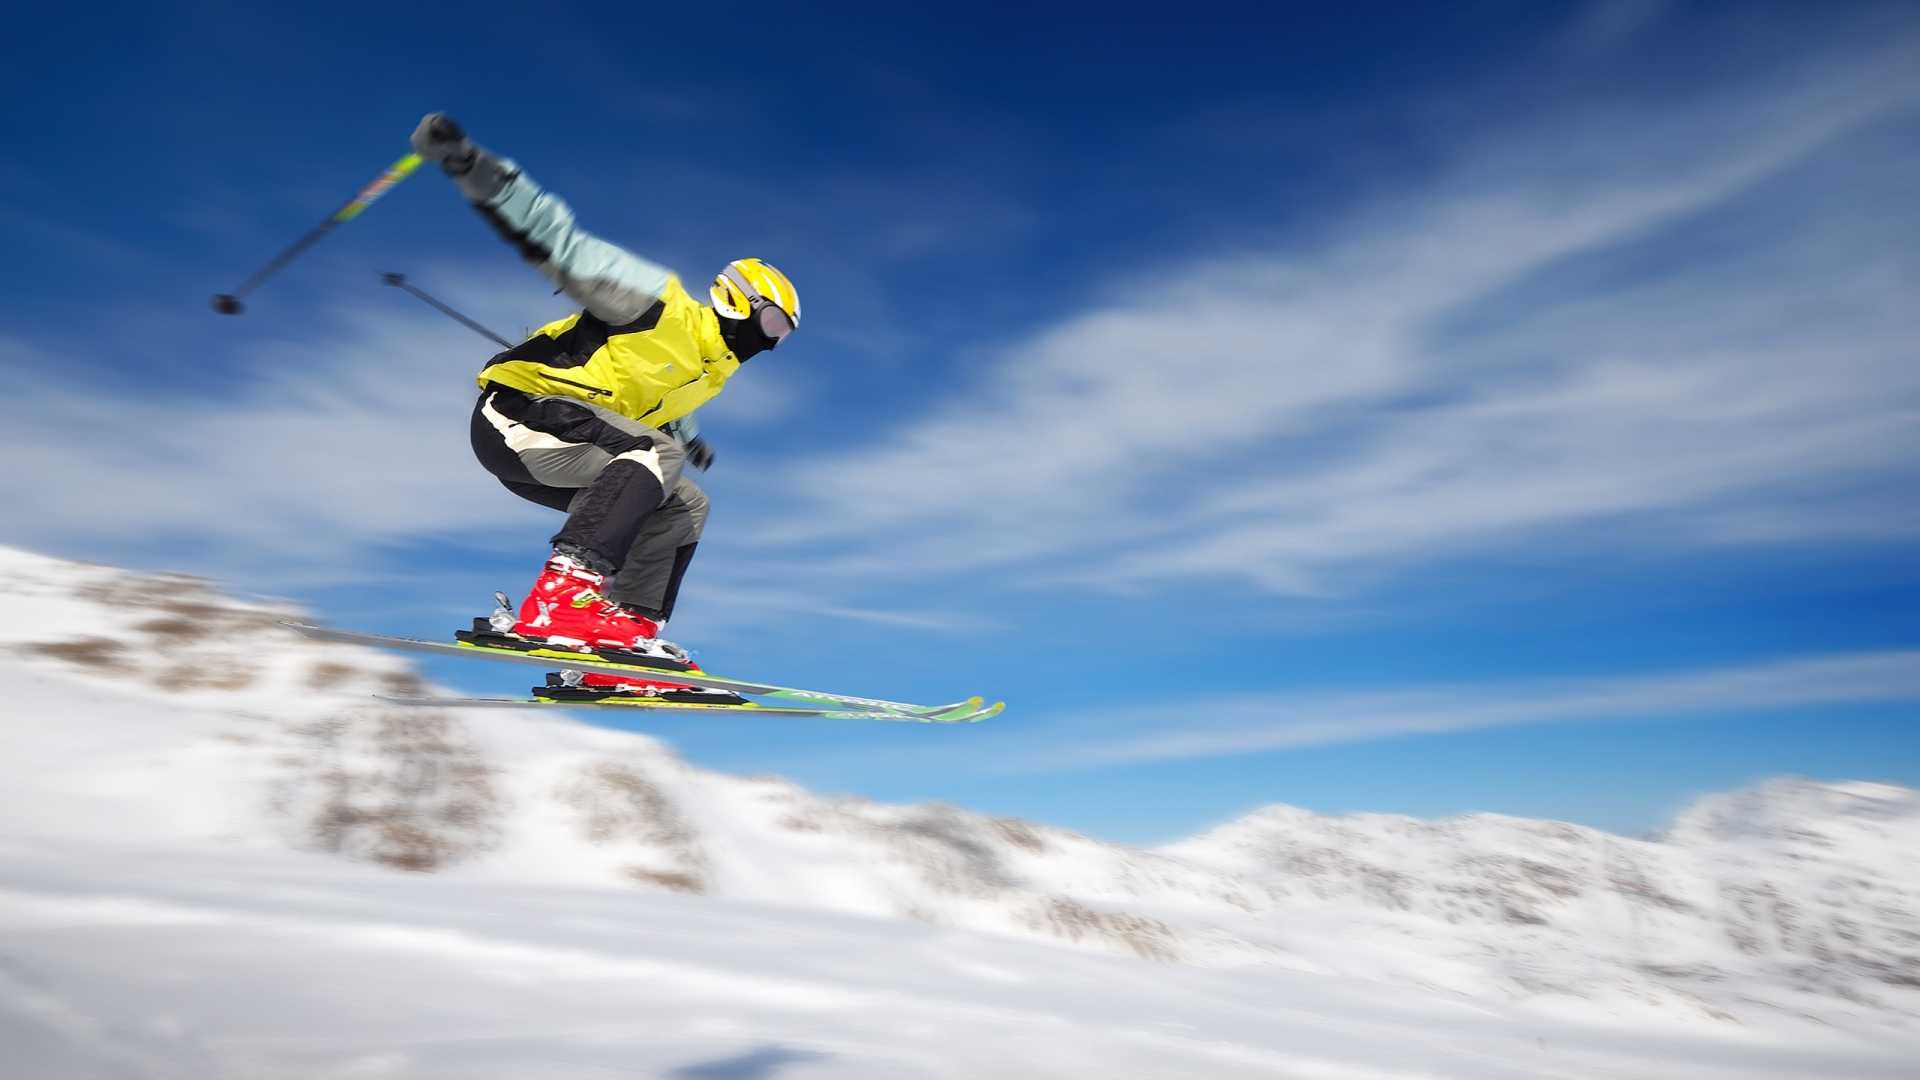 Extreme skiing   High Definition Wallpapers   HD wallpapers